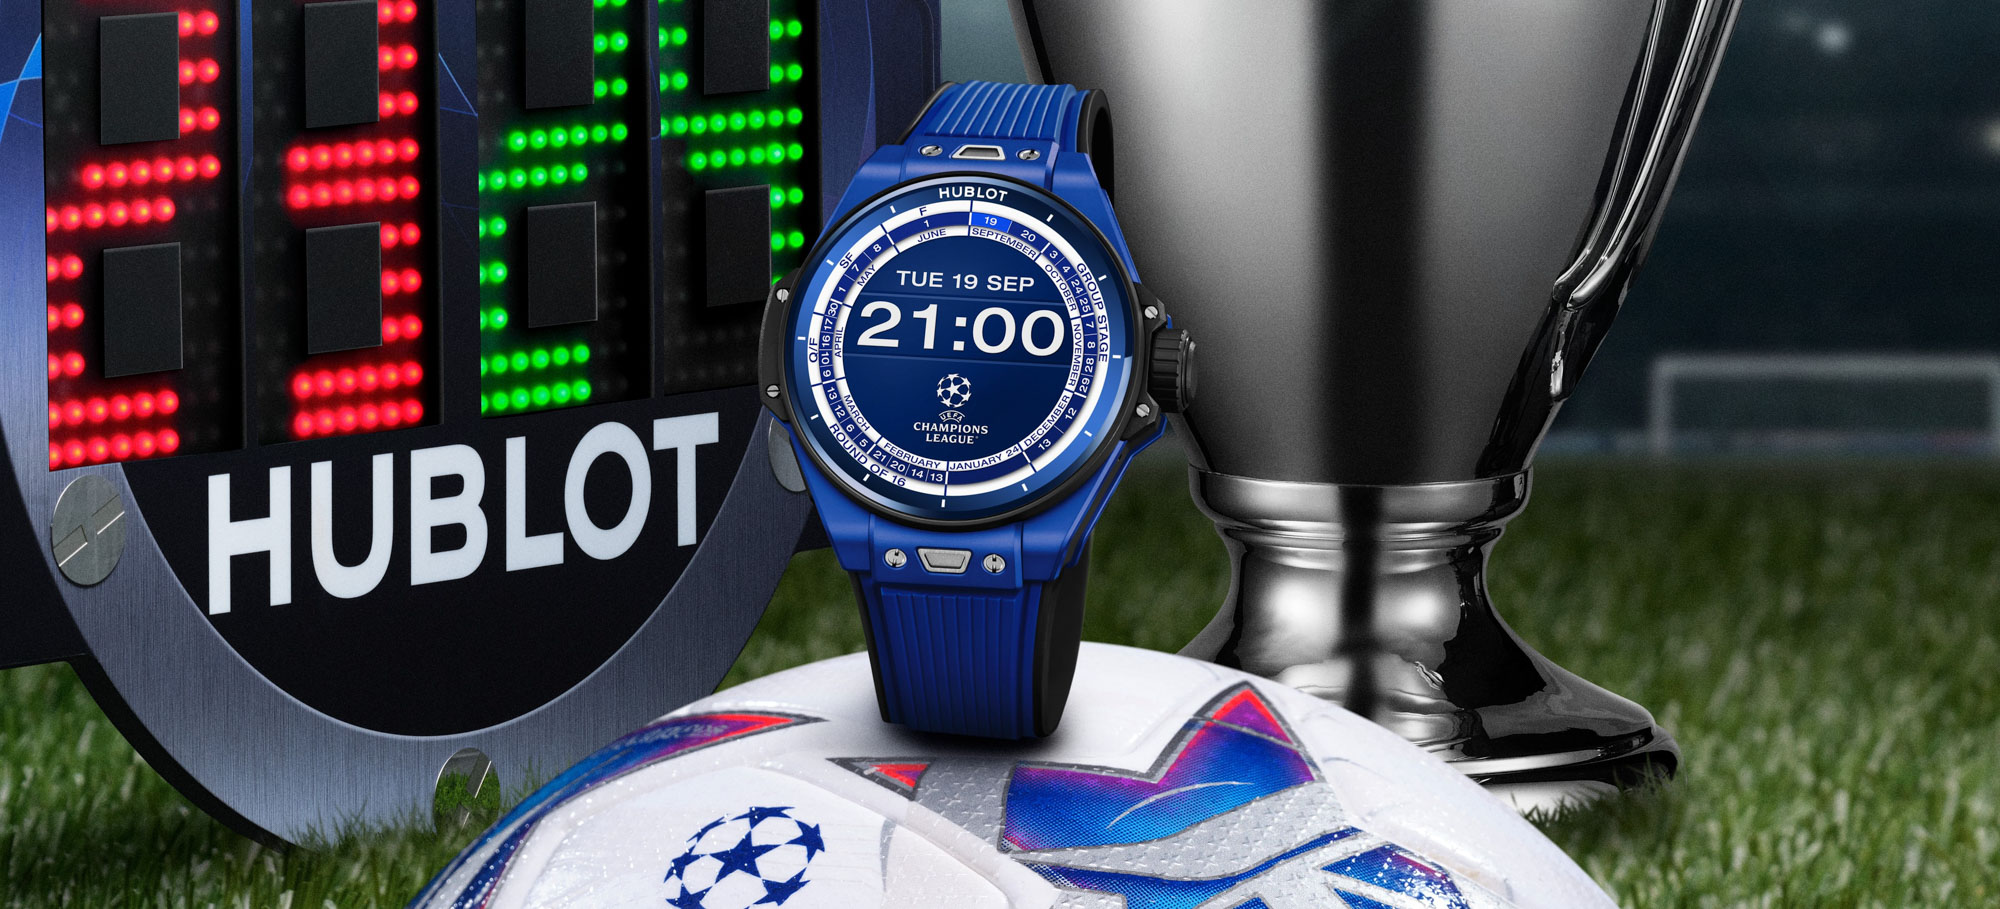 Hublot adds time and function to football with Big Bang e FIFA